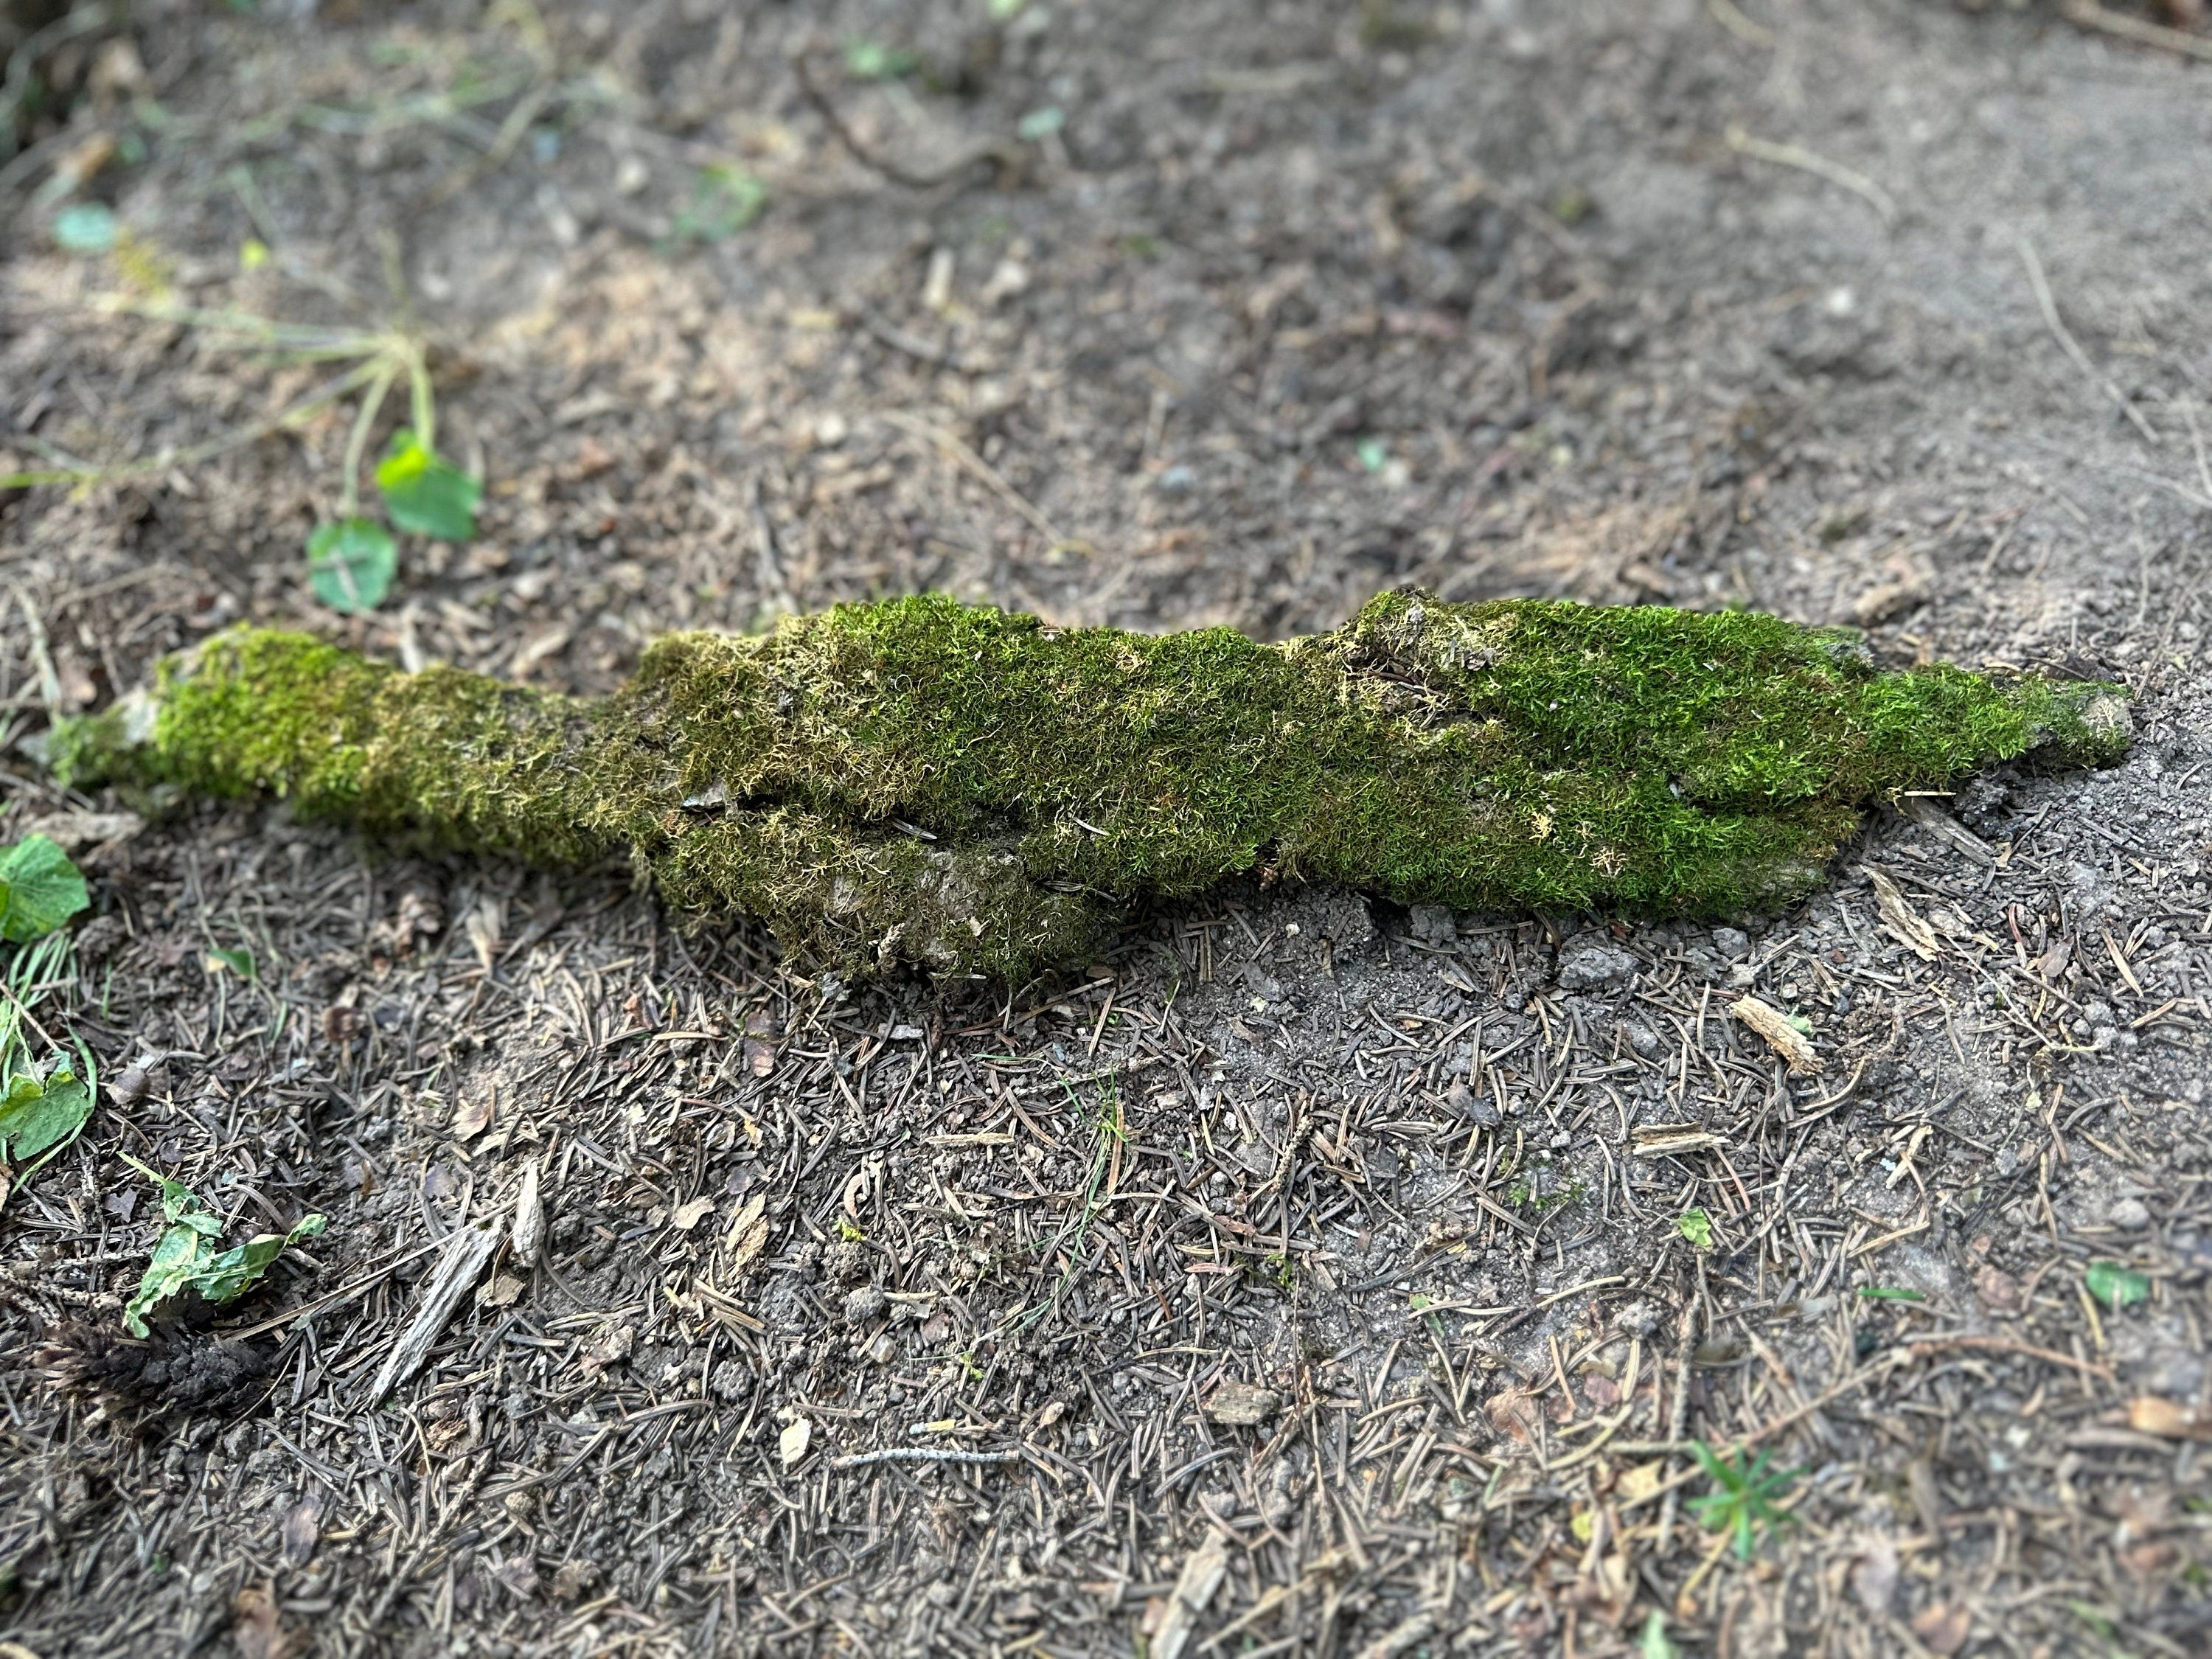 Moss Covered Bark, Mossy Bark, Approximately 17.5 Inches Long by 3 Inches Wide and 1/2 Inch High